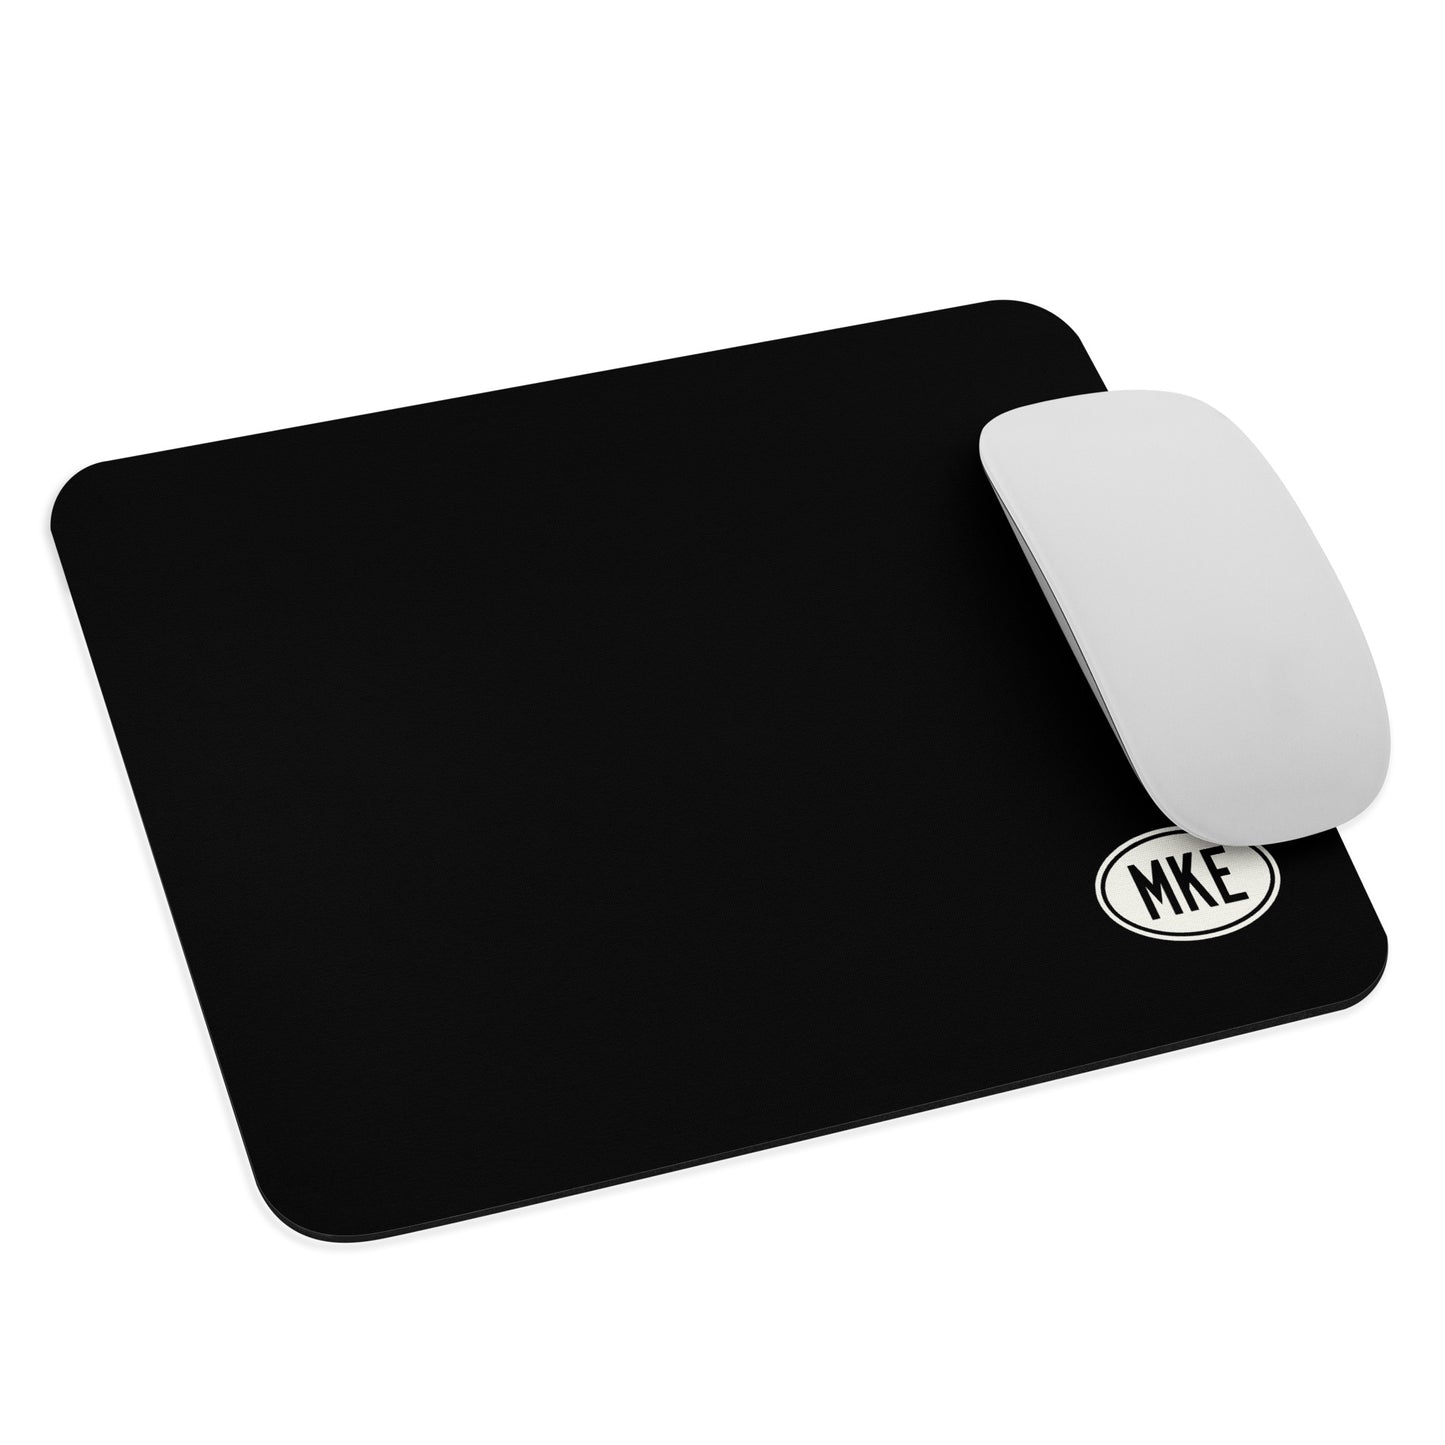 Unique Travel Gift Mouse Pad - White Oval • MKE Milwaukee • YHM Designs - Image 03